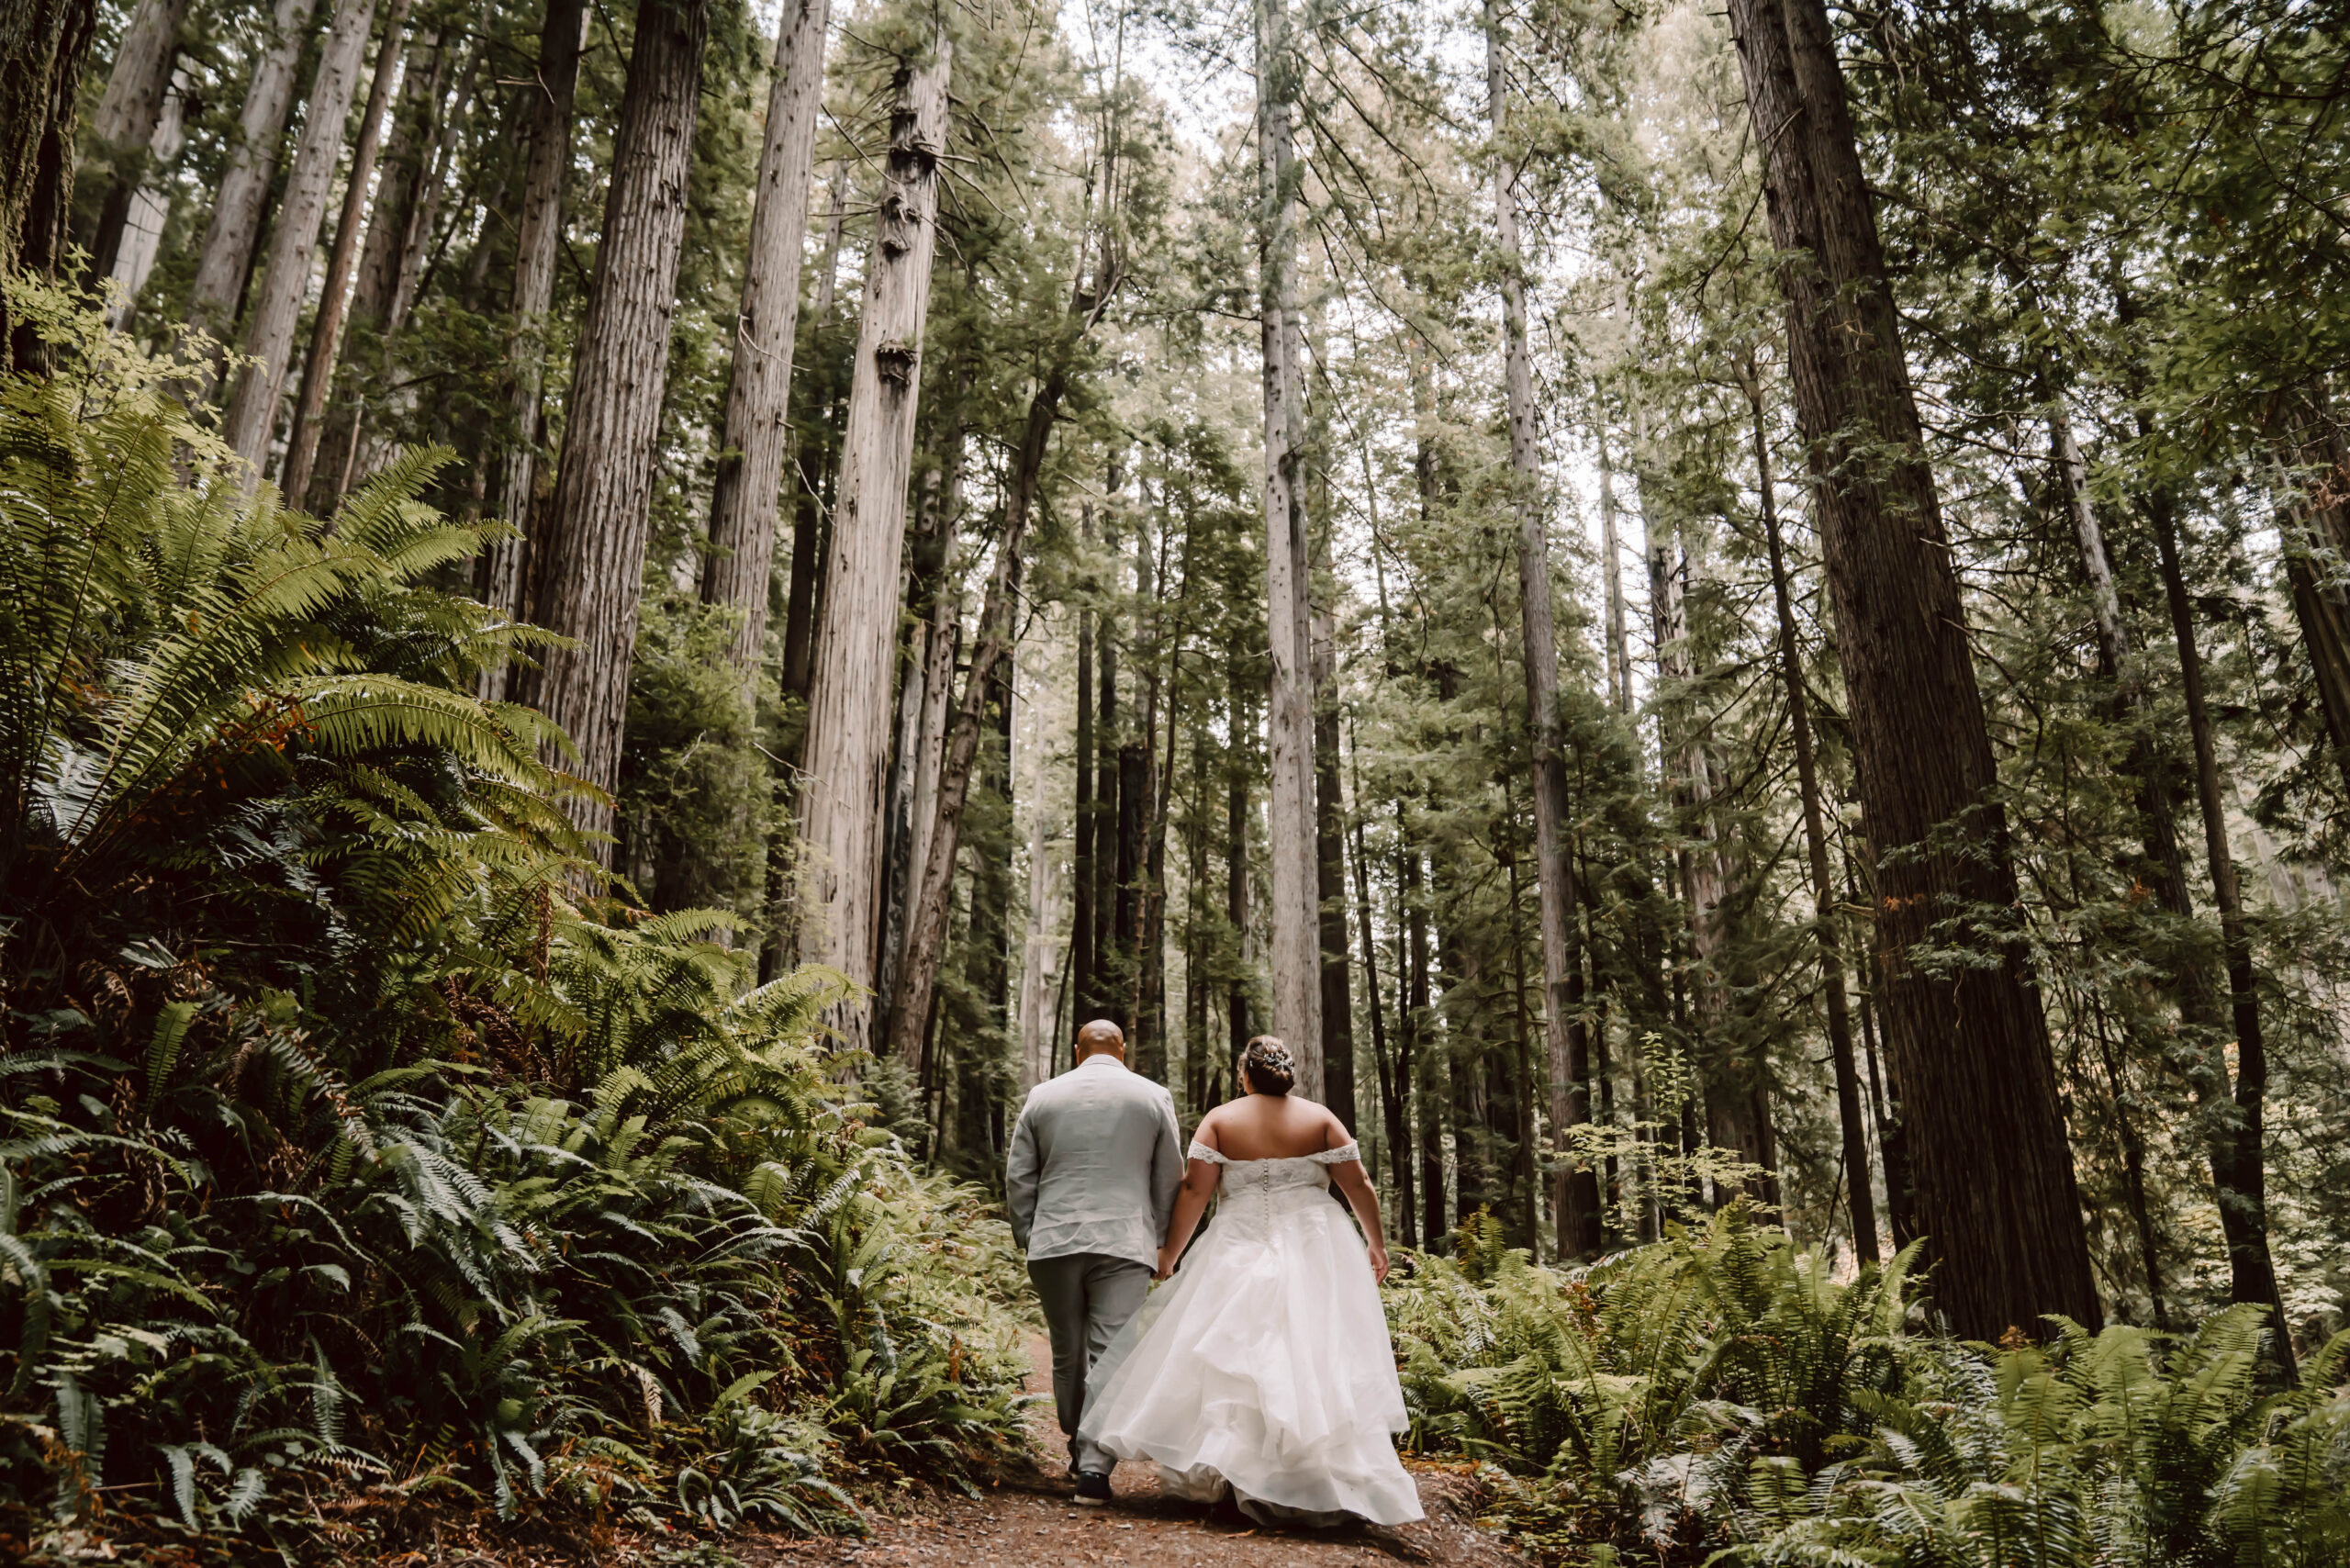 A bride and groom walking through the giant redwood forest in Northern California for their Elopement day 